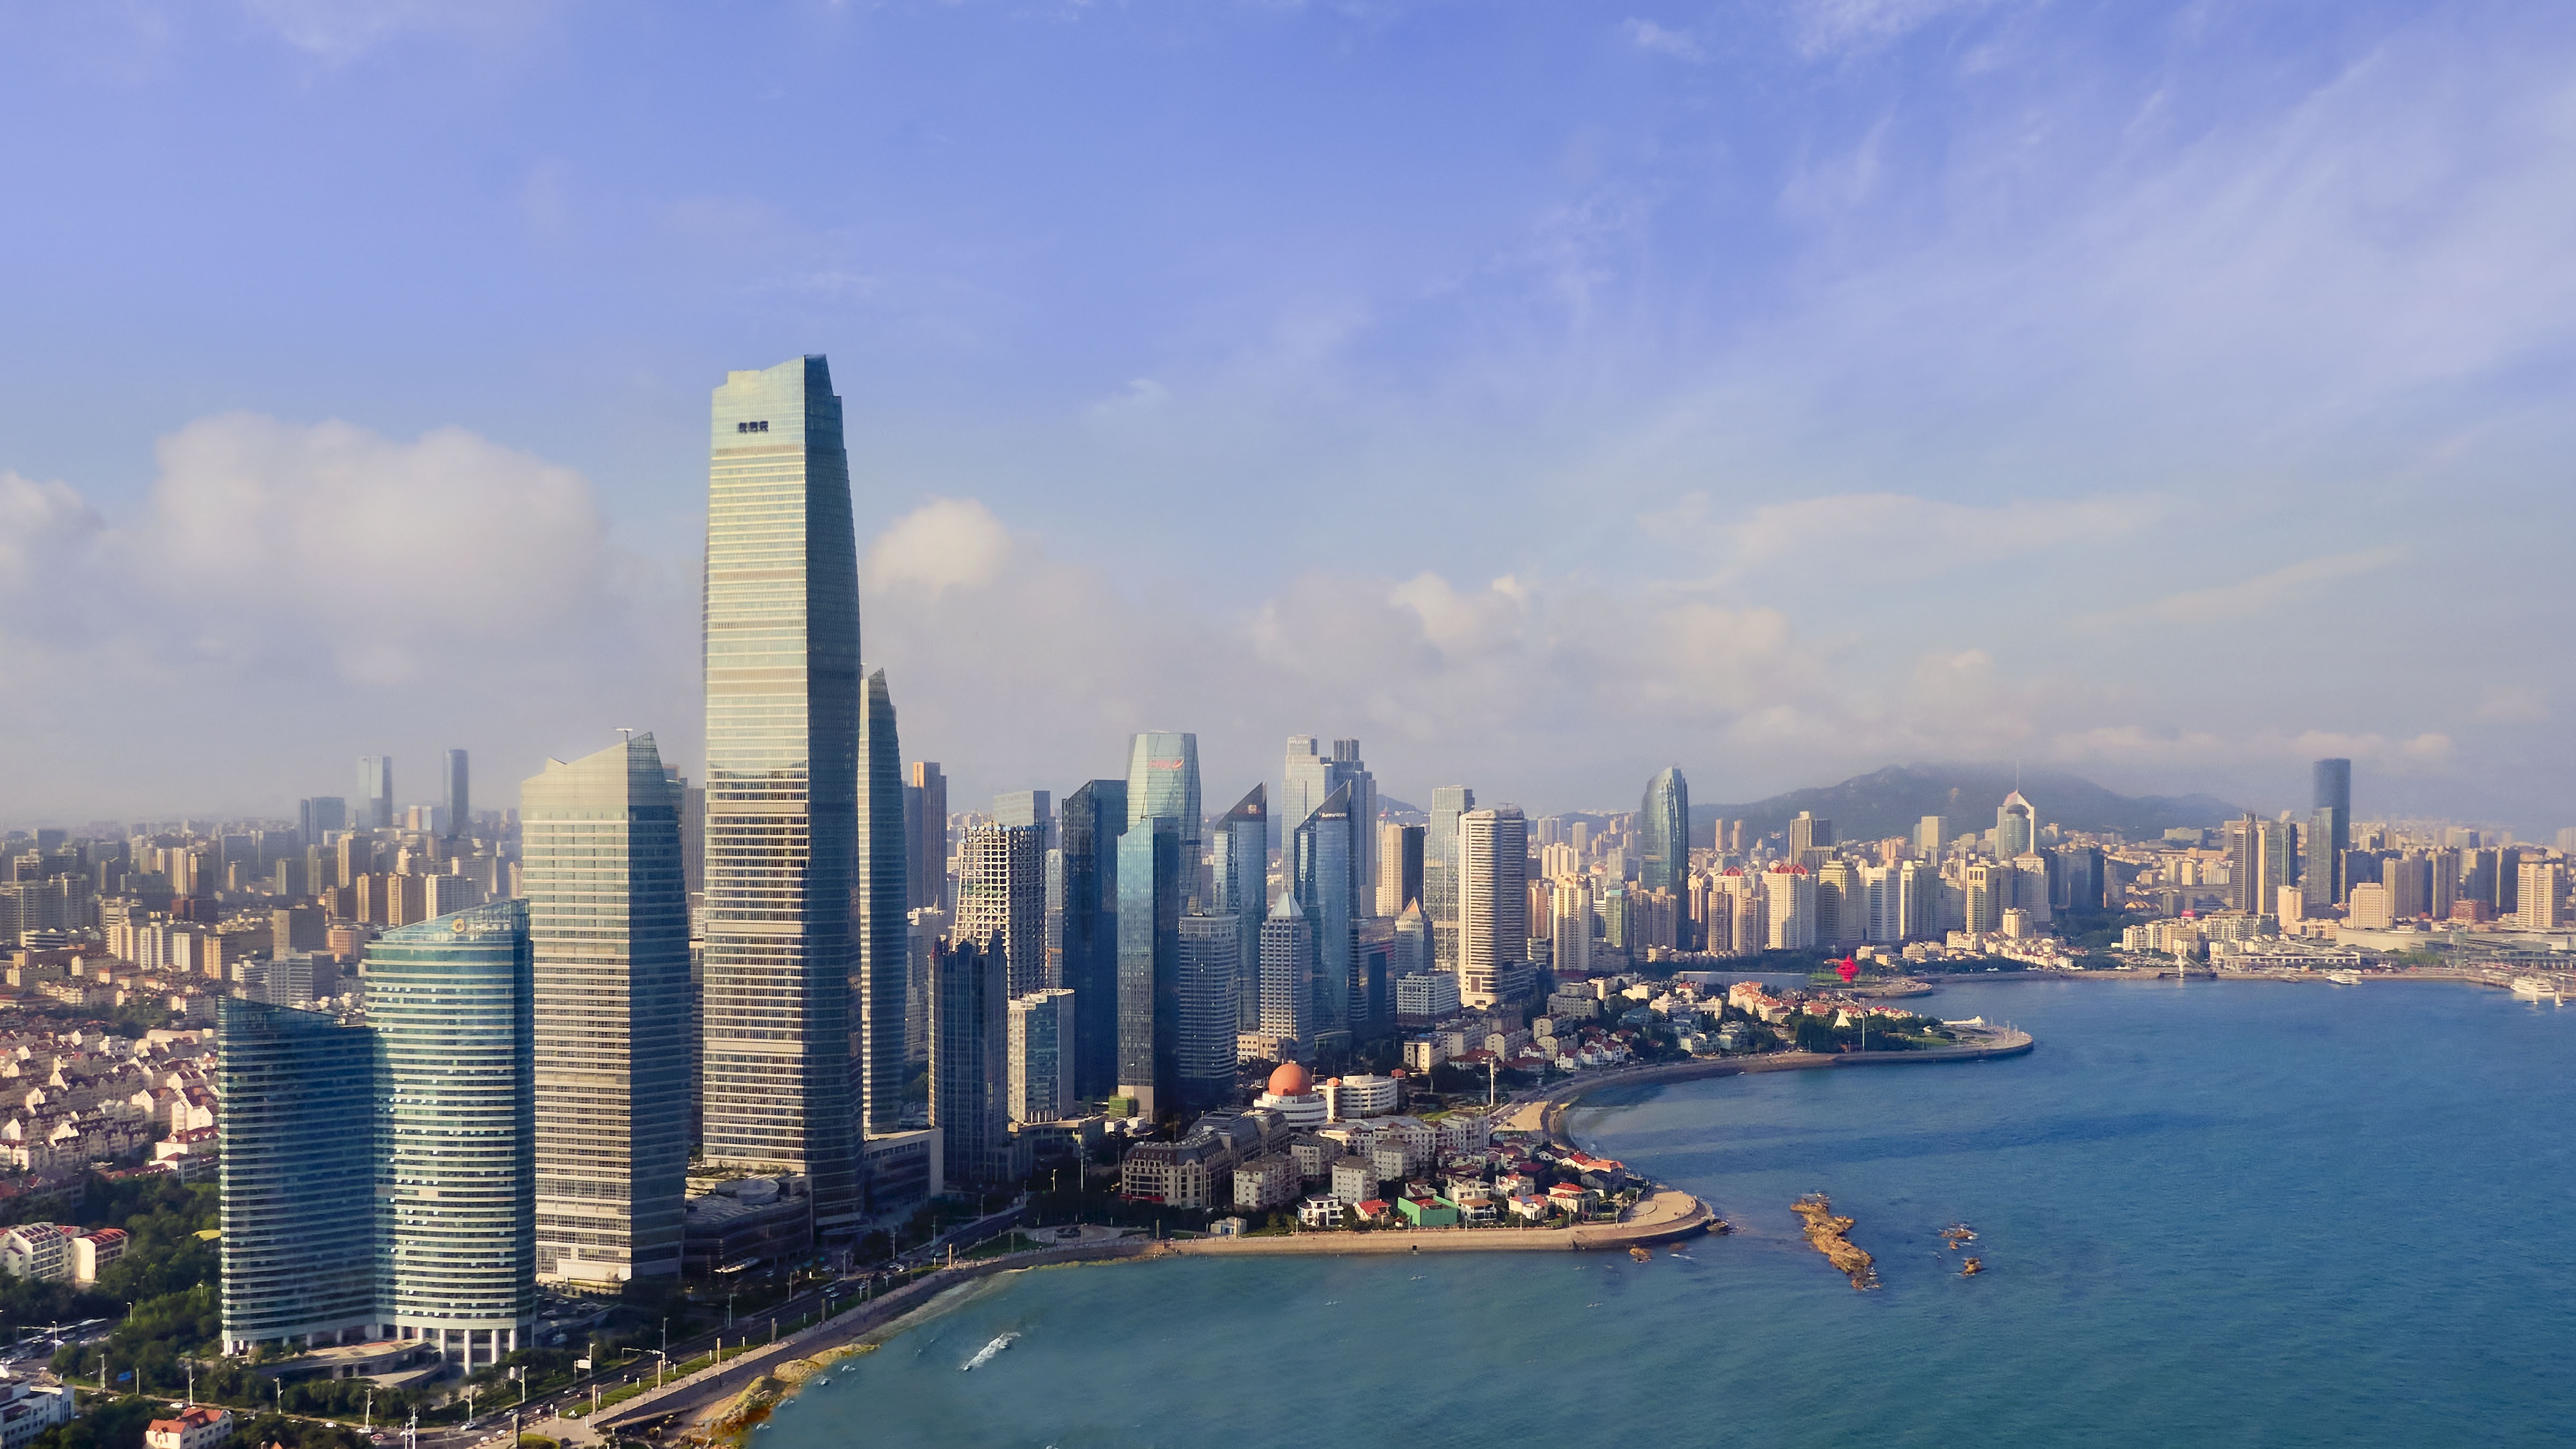 St. Regis Hotels and Resorts Makes Glamorous Debut in China's Coastal City of Qingdao. Marriott News Center